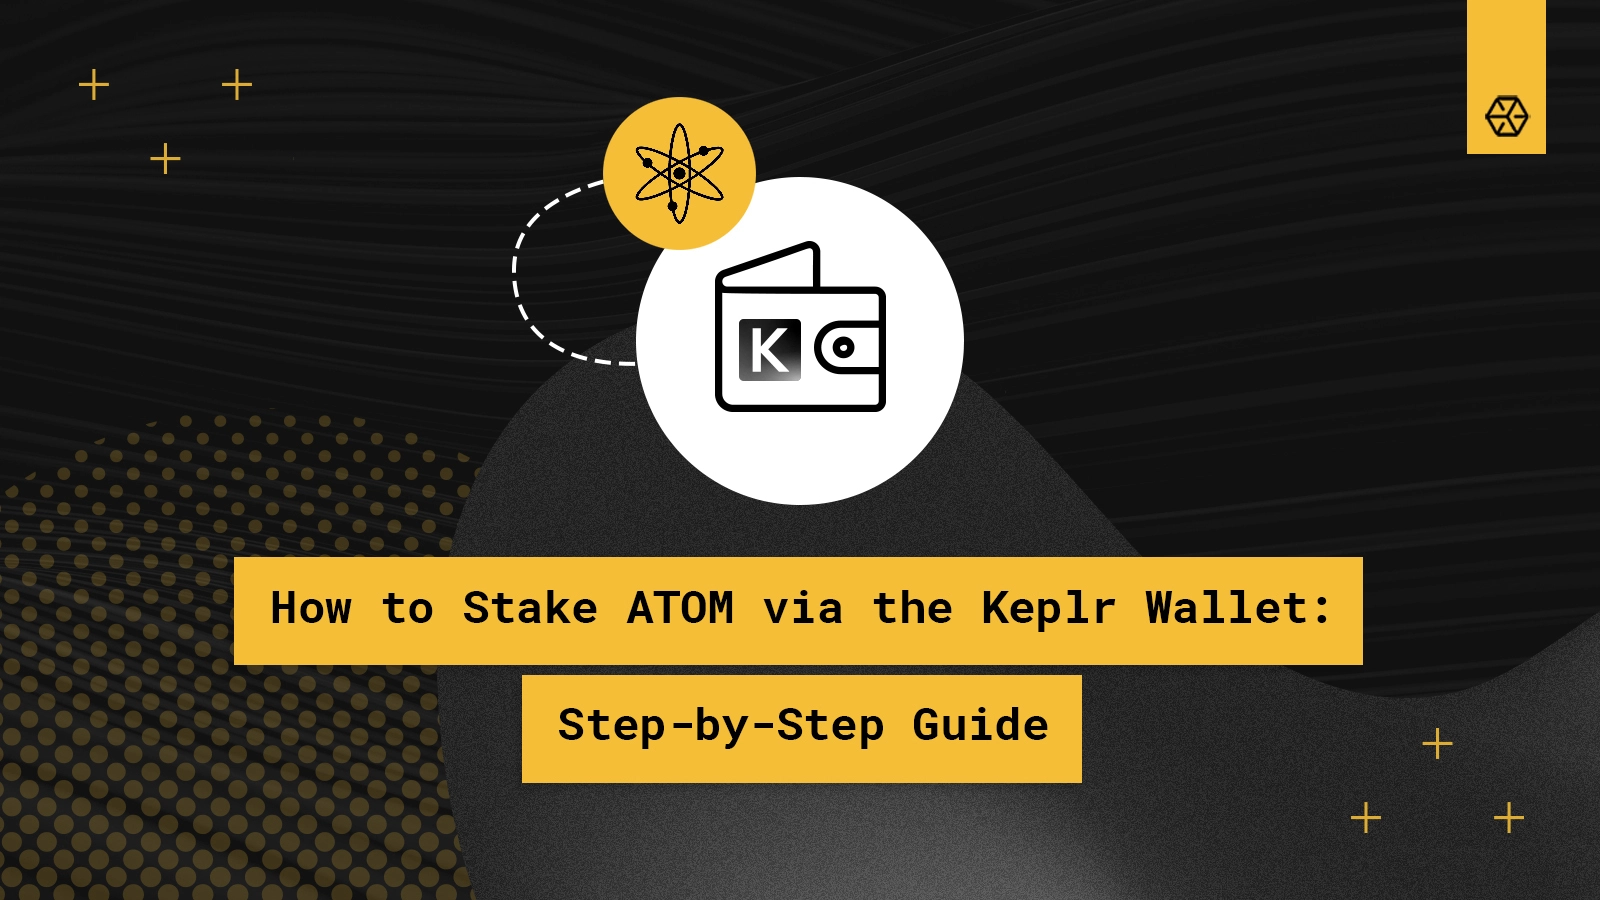 How to Stake Cosmos (ATOM) Using the Keplr Wallet: A Step-by-Step Guide